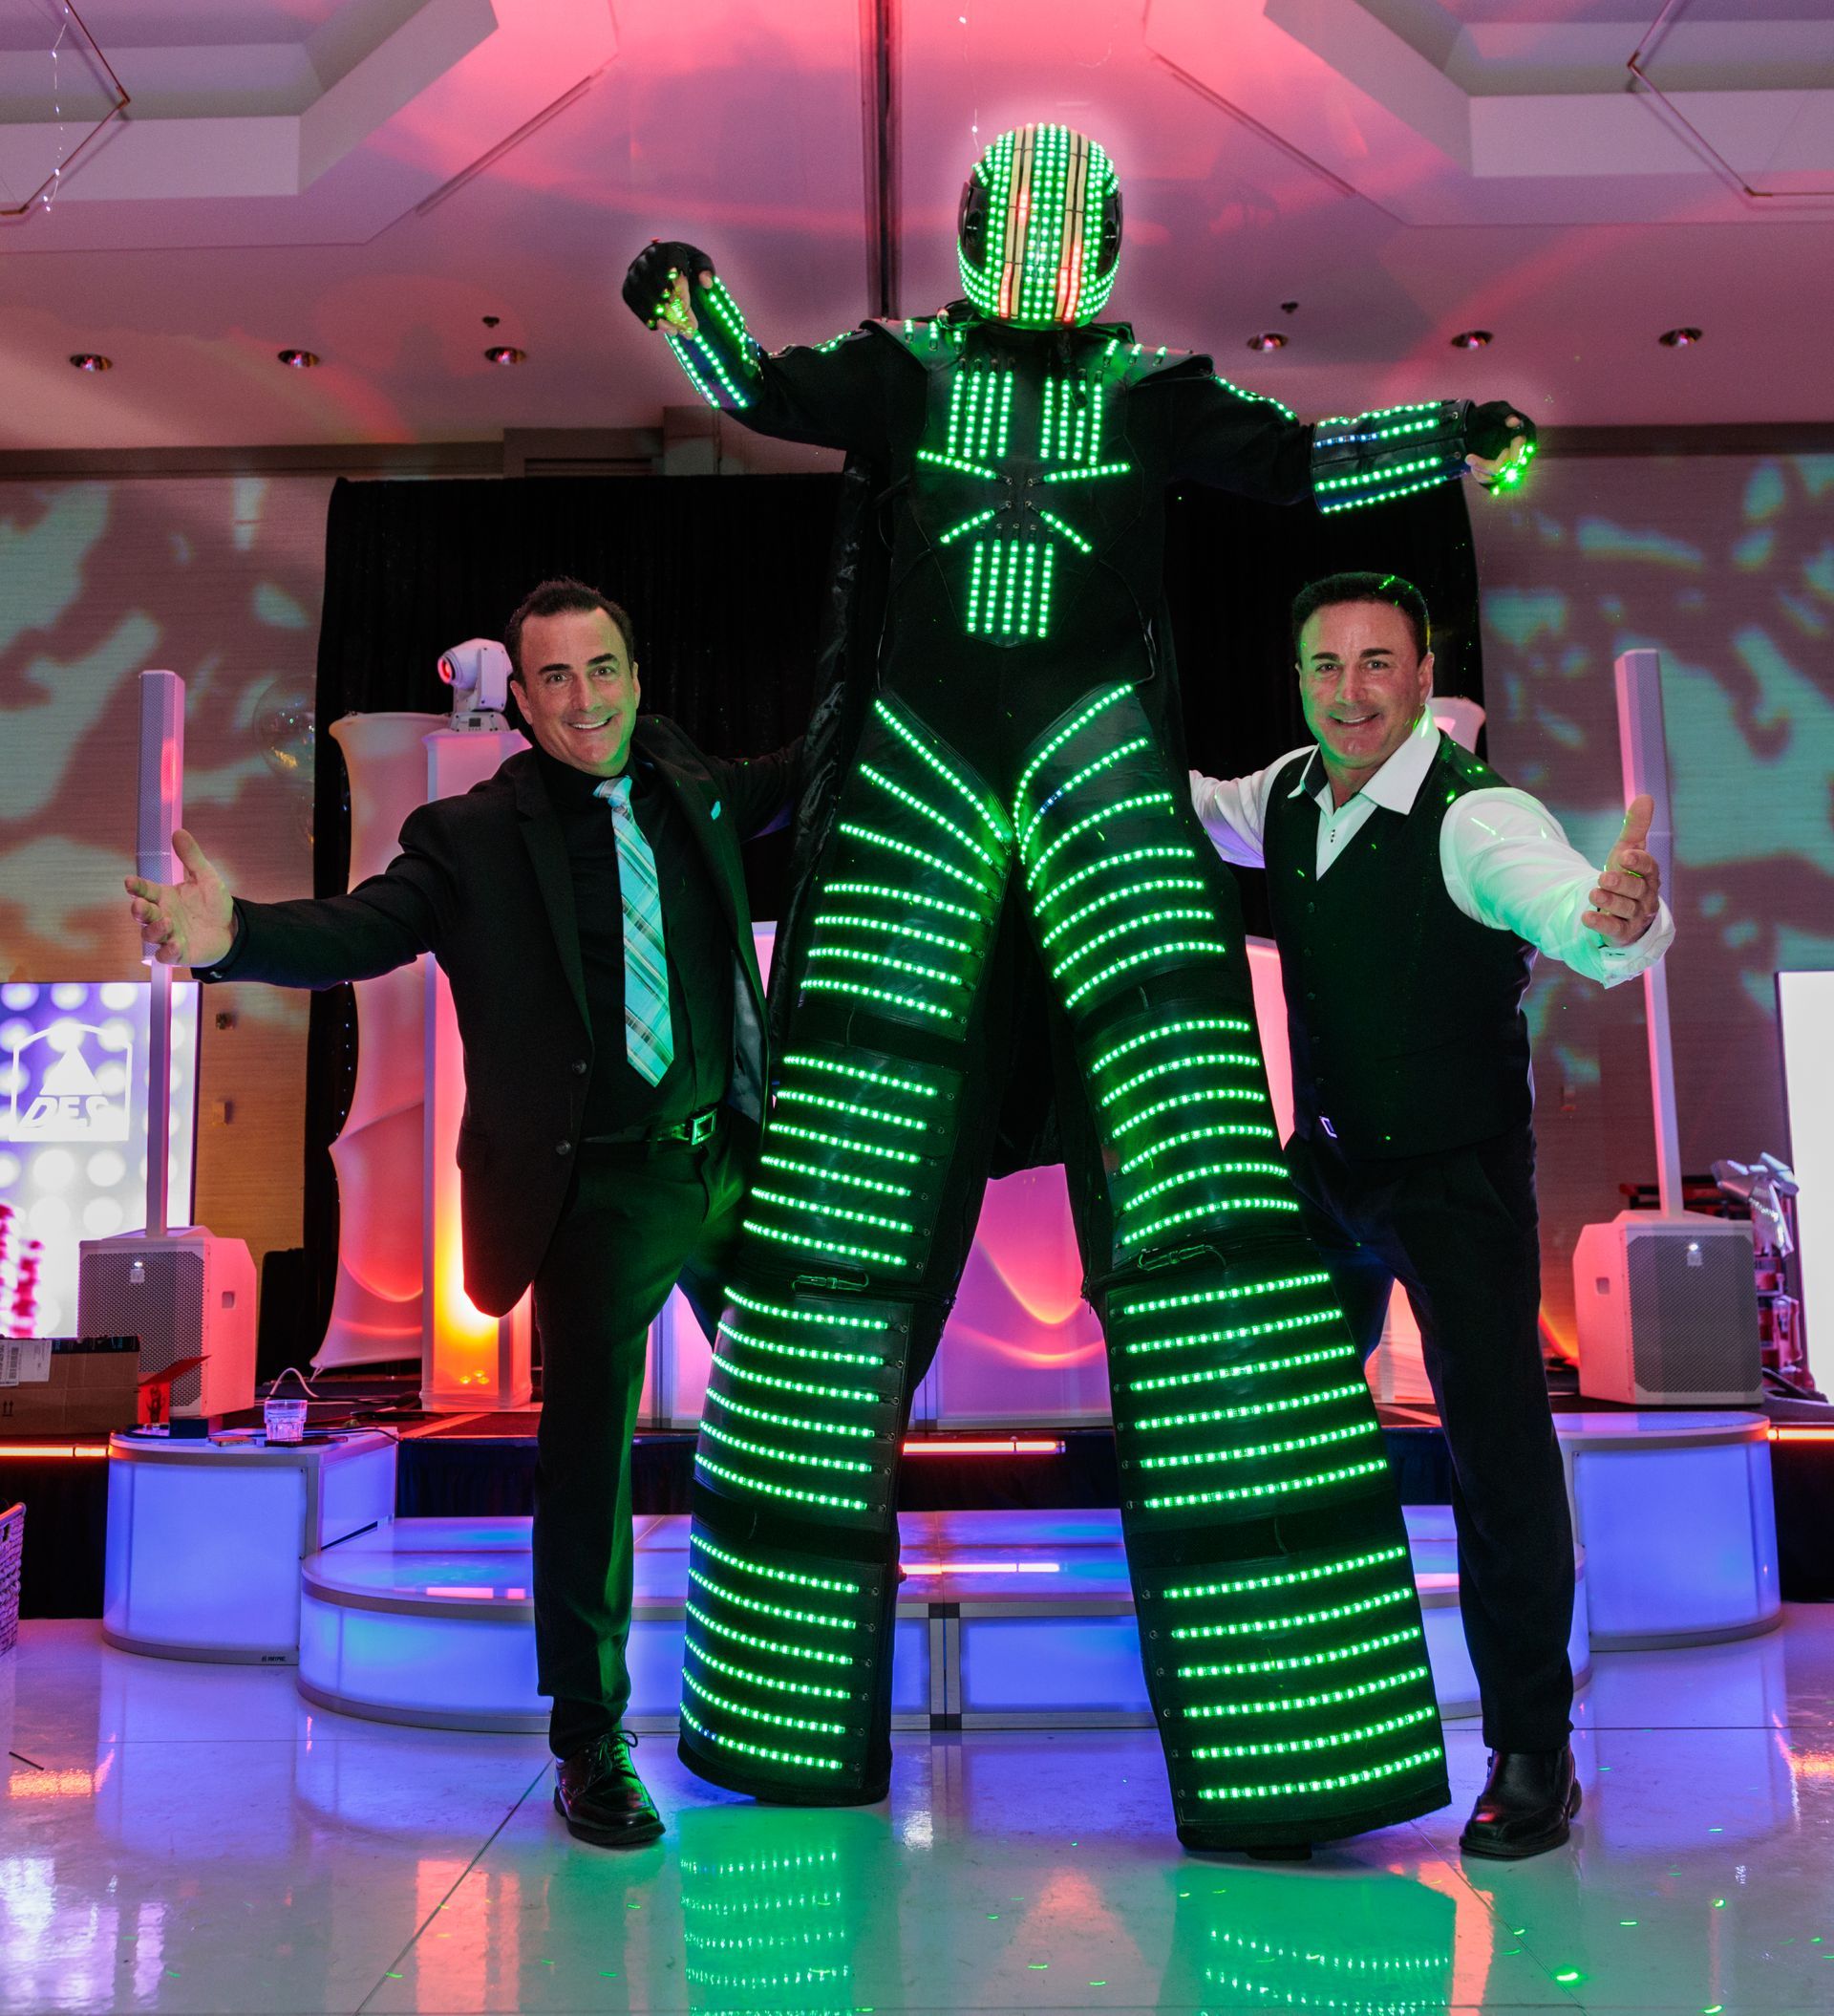 Two men are standing next to a robot dressed in green lights.